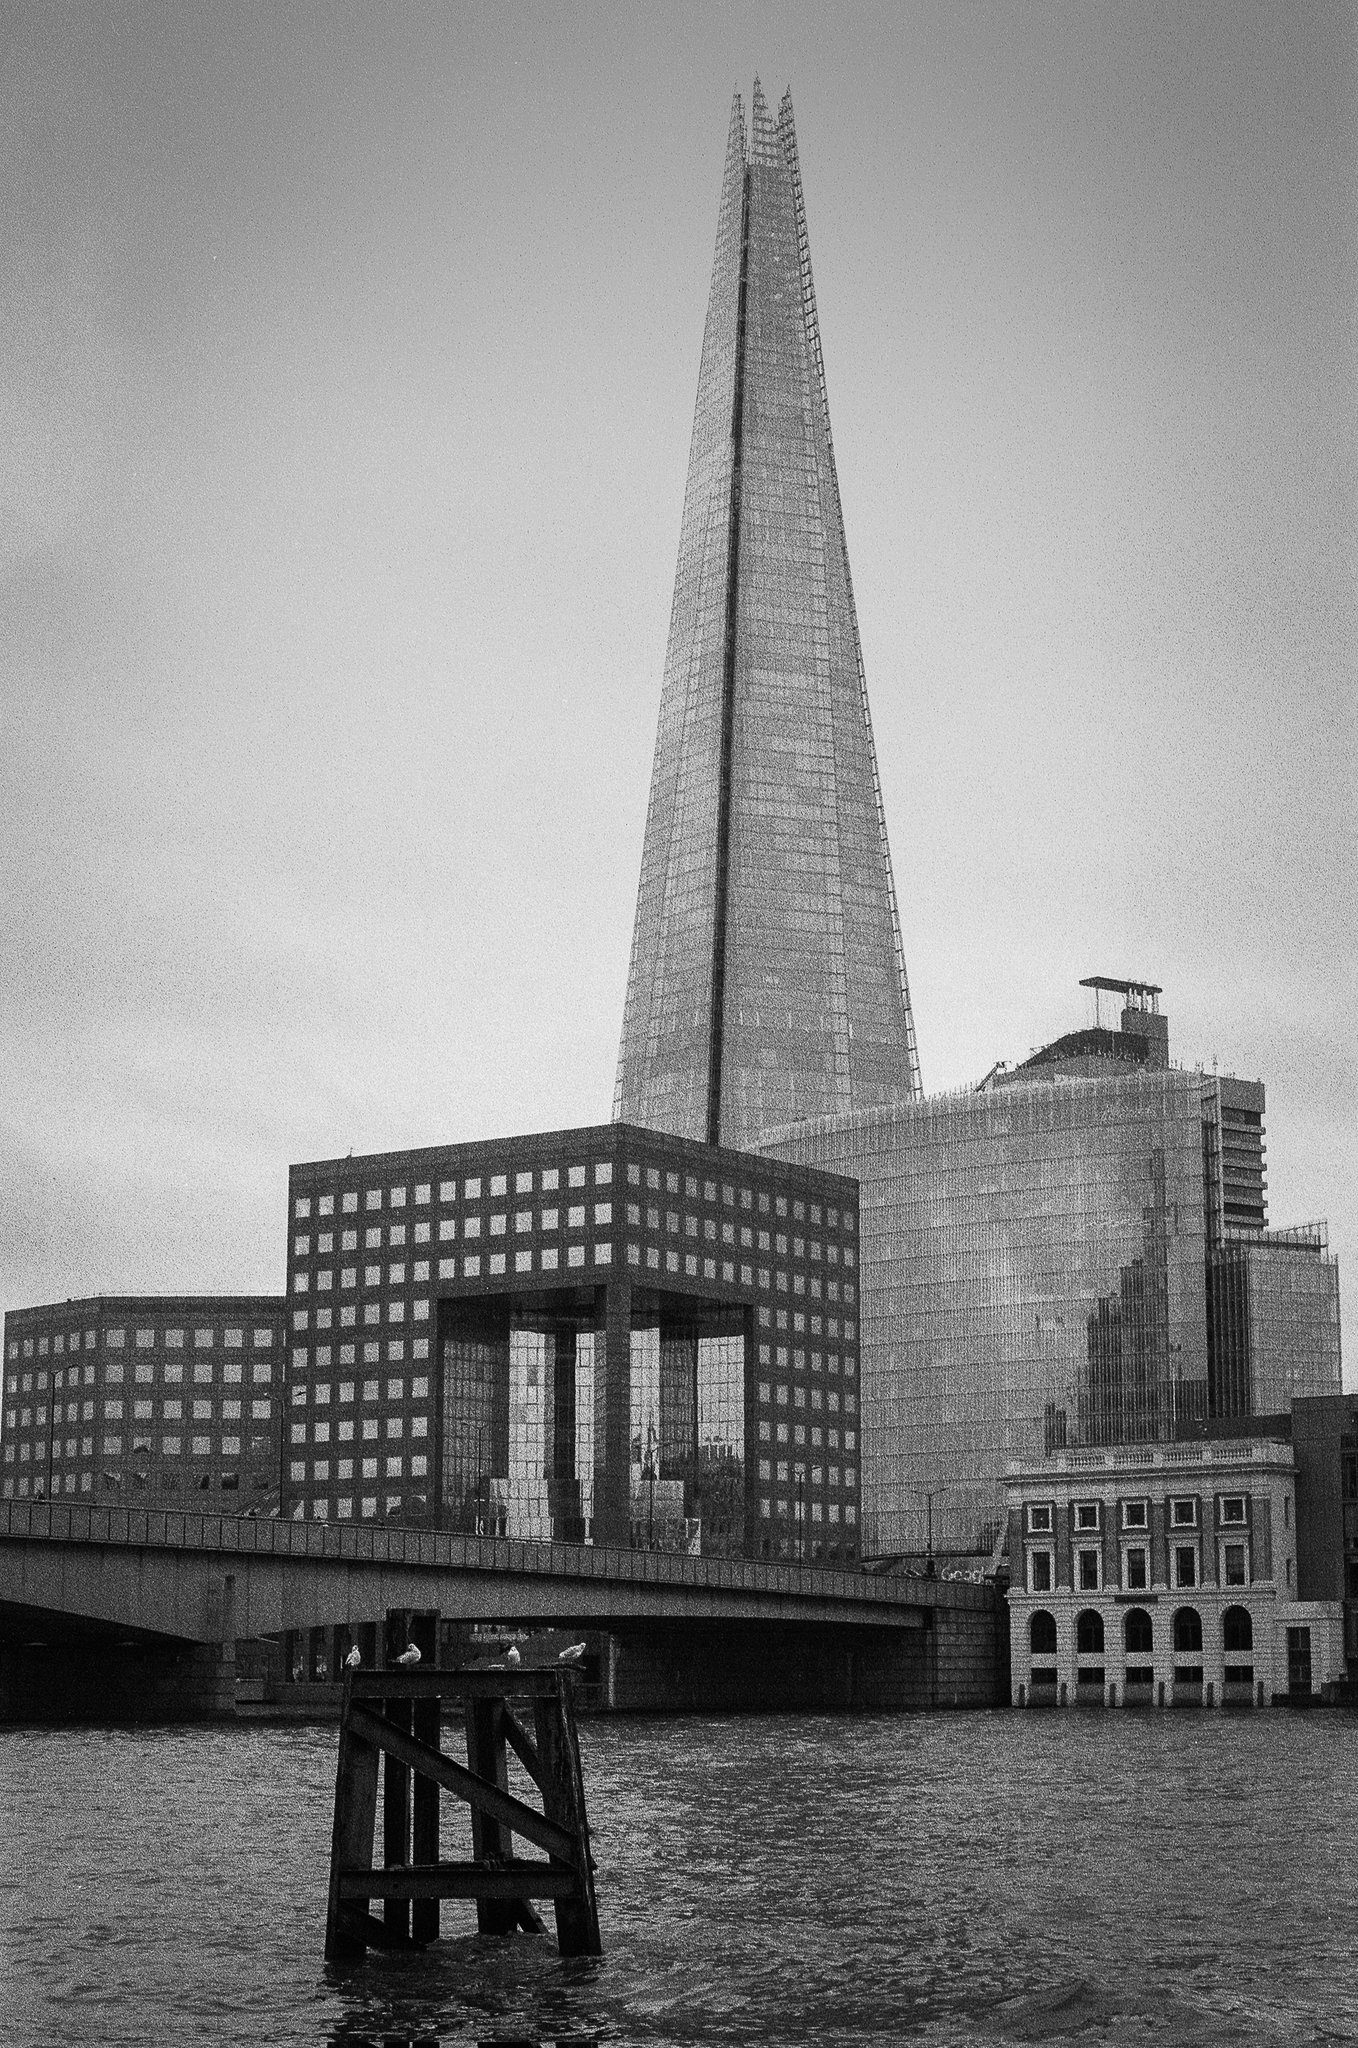 @davejsherwood A shot of The Shard and London Bridge for this week's #ilfordphoto #fridayfavourites #themefree. Shot on #delta3200, which I'll be using to document Castlerigg Stone Circle this coming week.